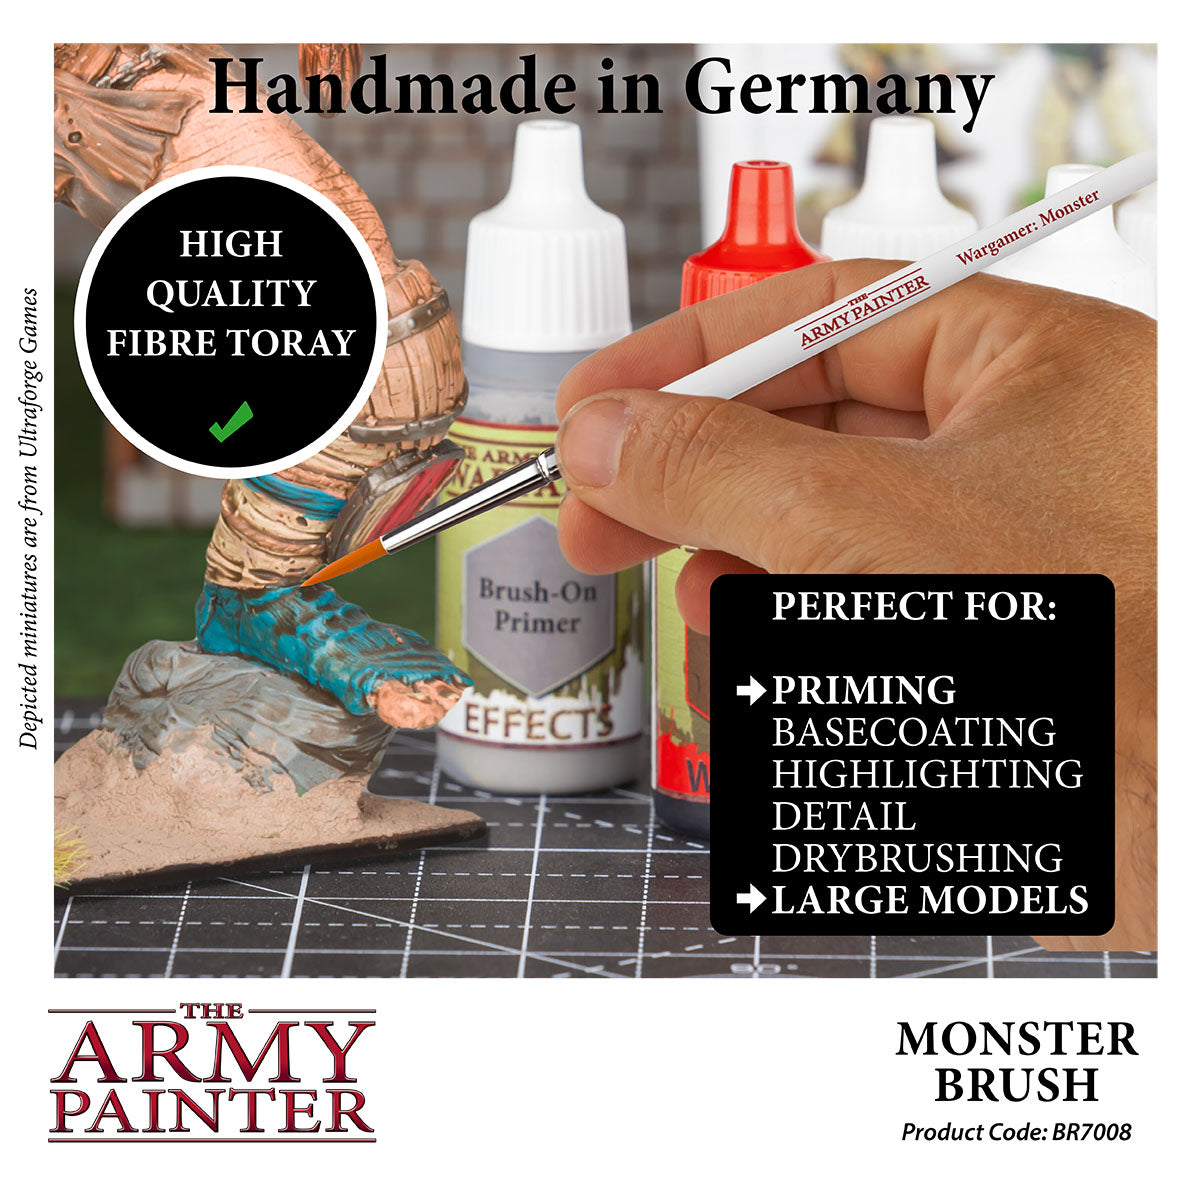 The Dragon - We have new brushes! Army Painter brushes are here